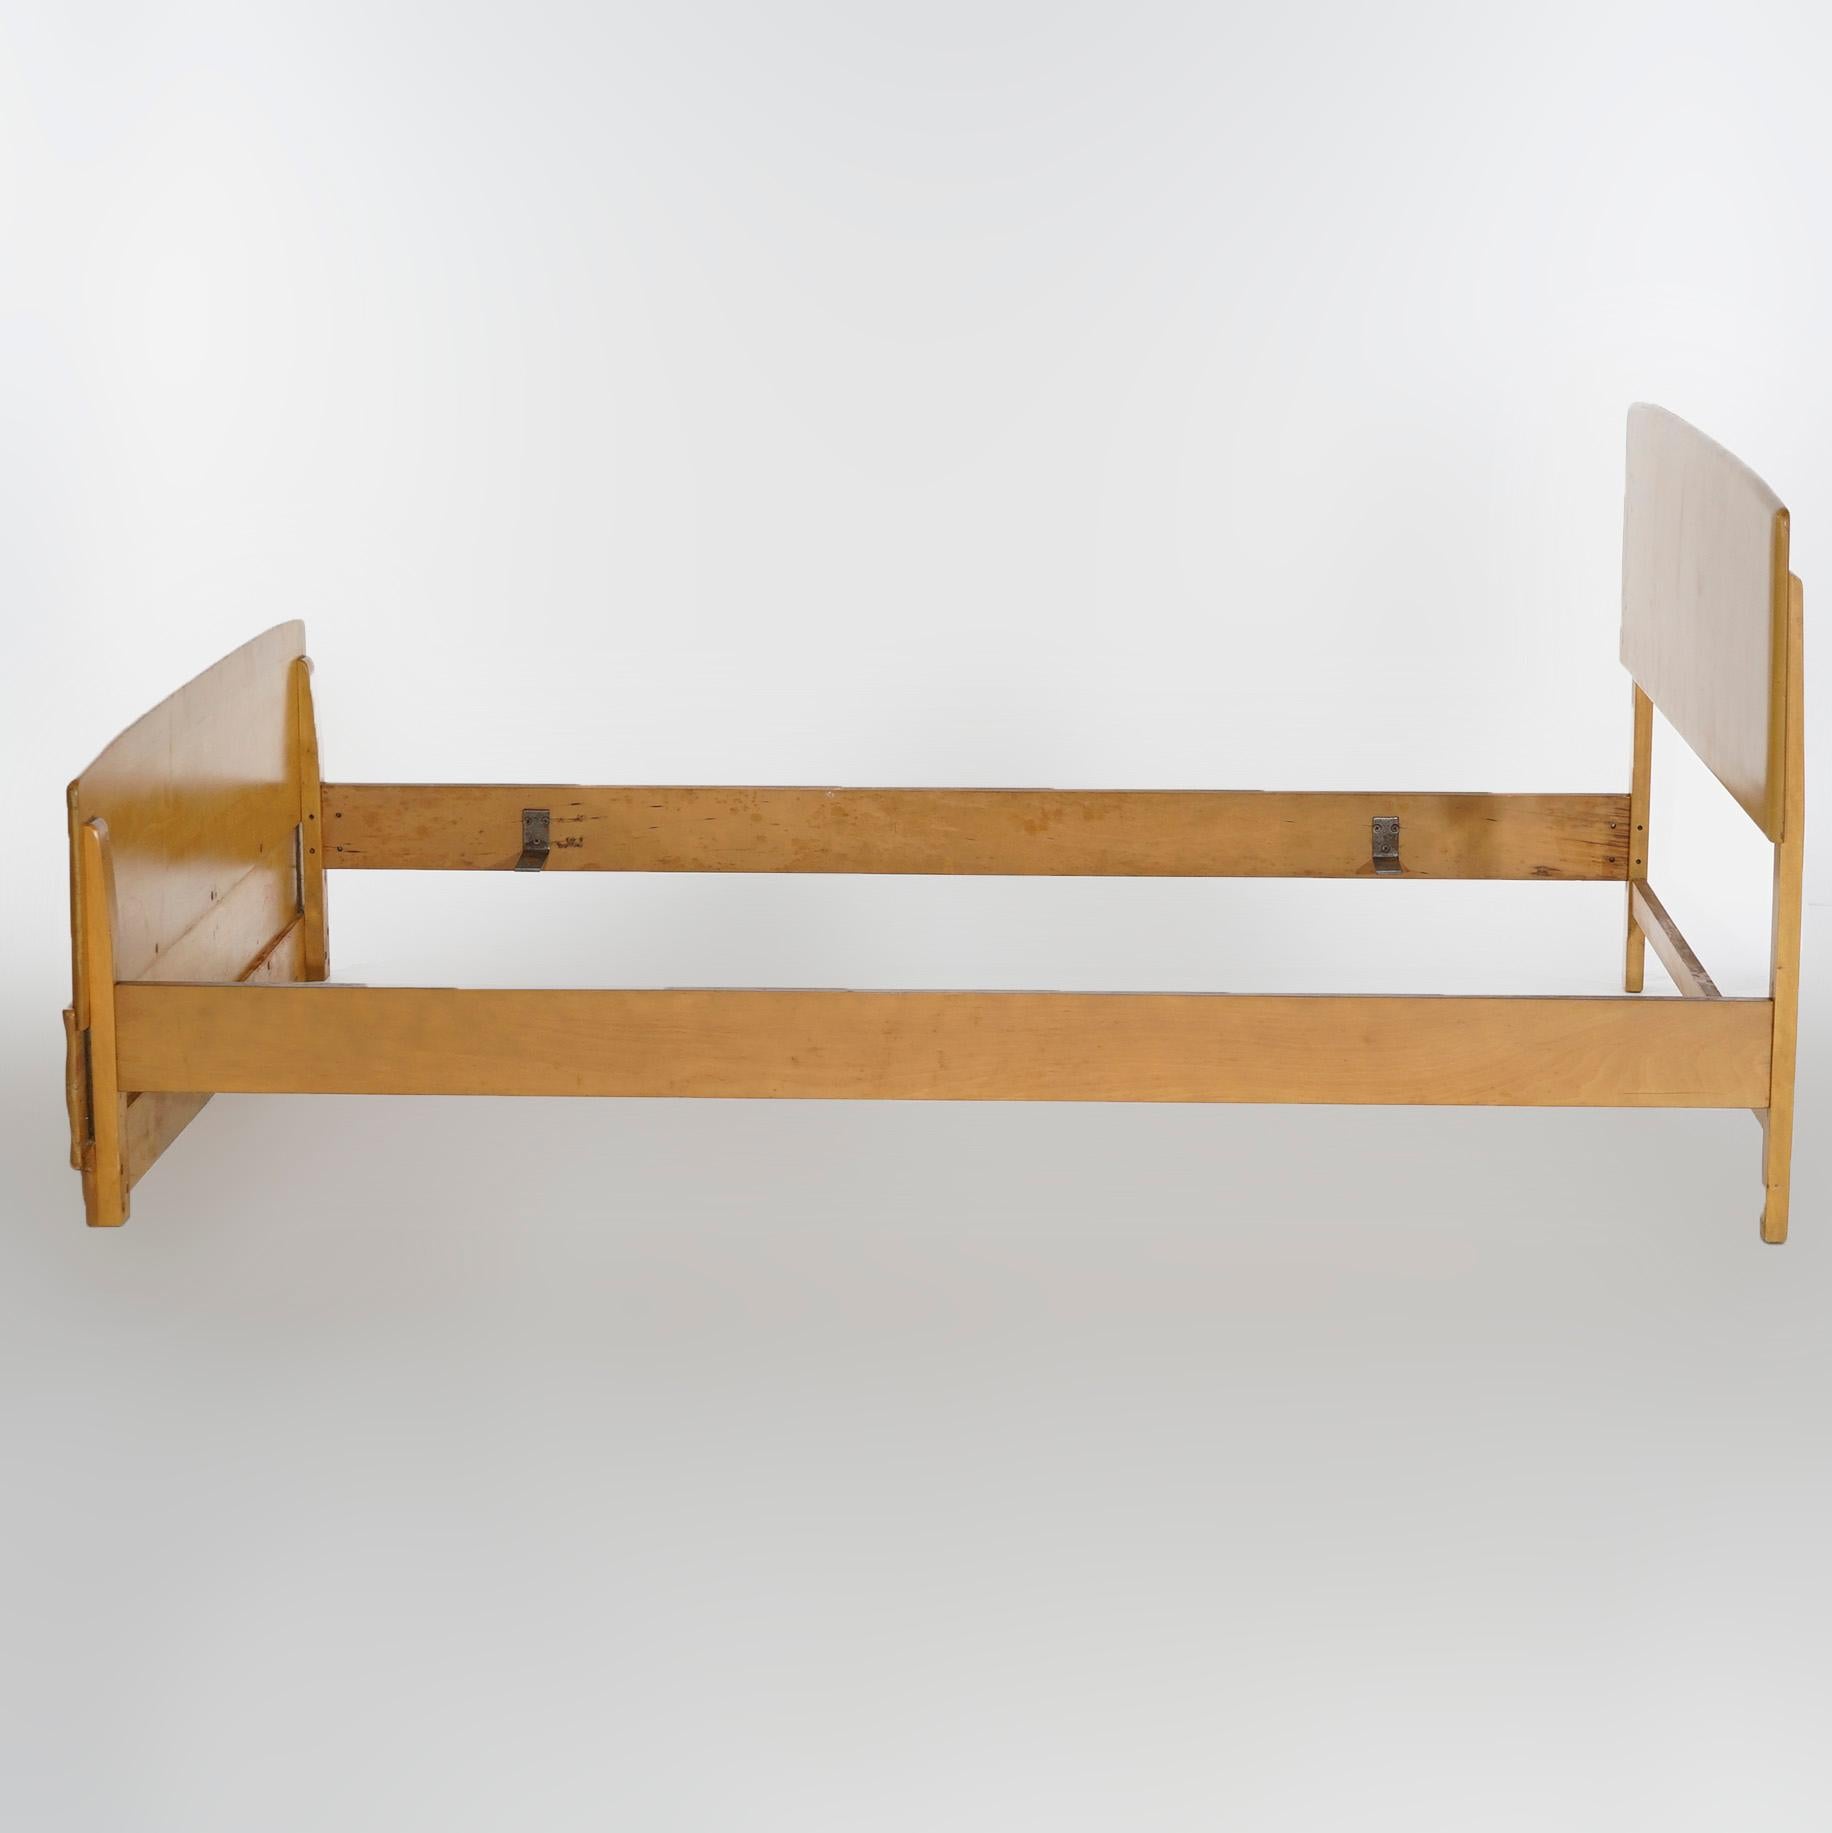 American Mid-Century Modern Heywood Wakefield Double Bed, Wheat Finish, circa 1950 For Sale